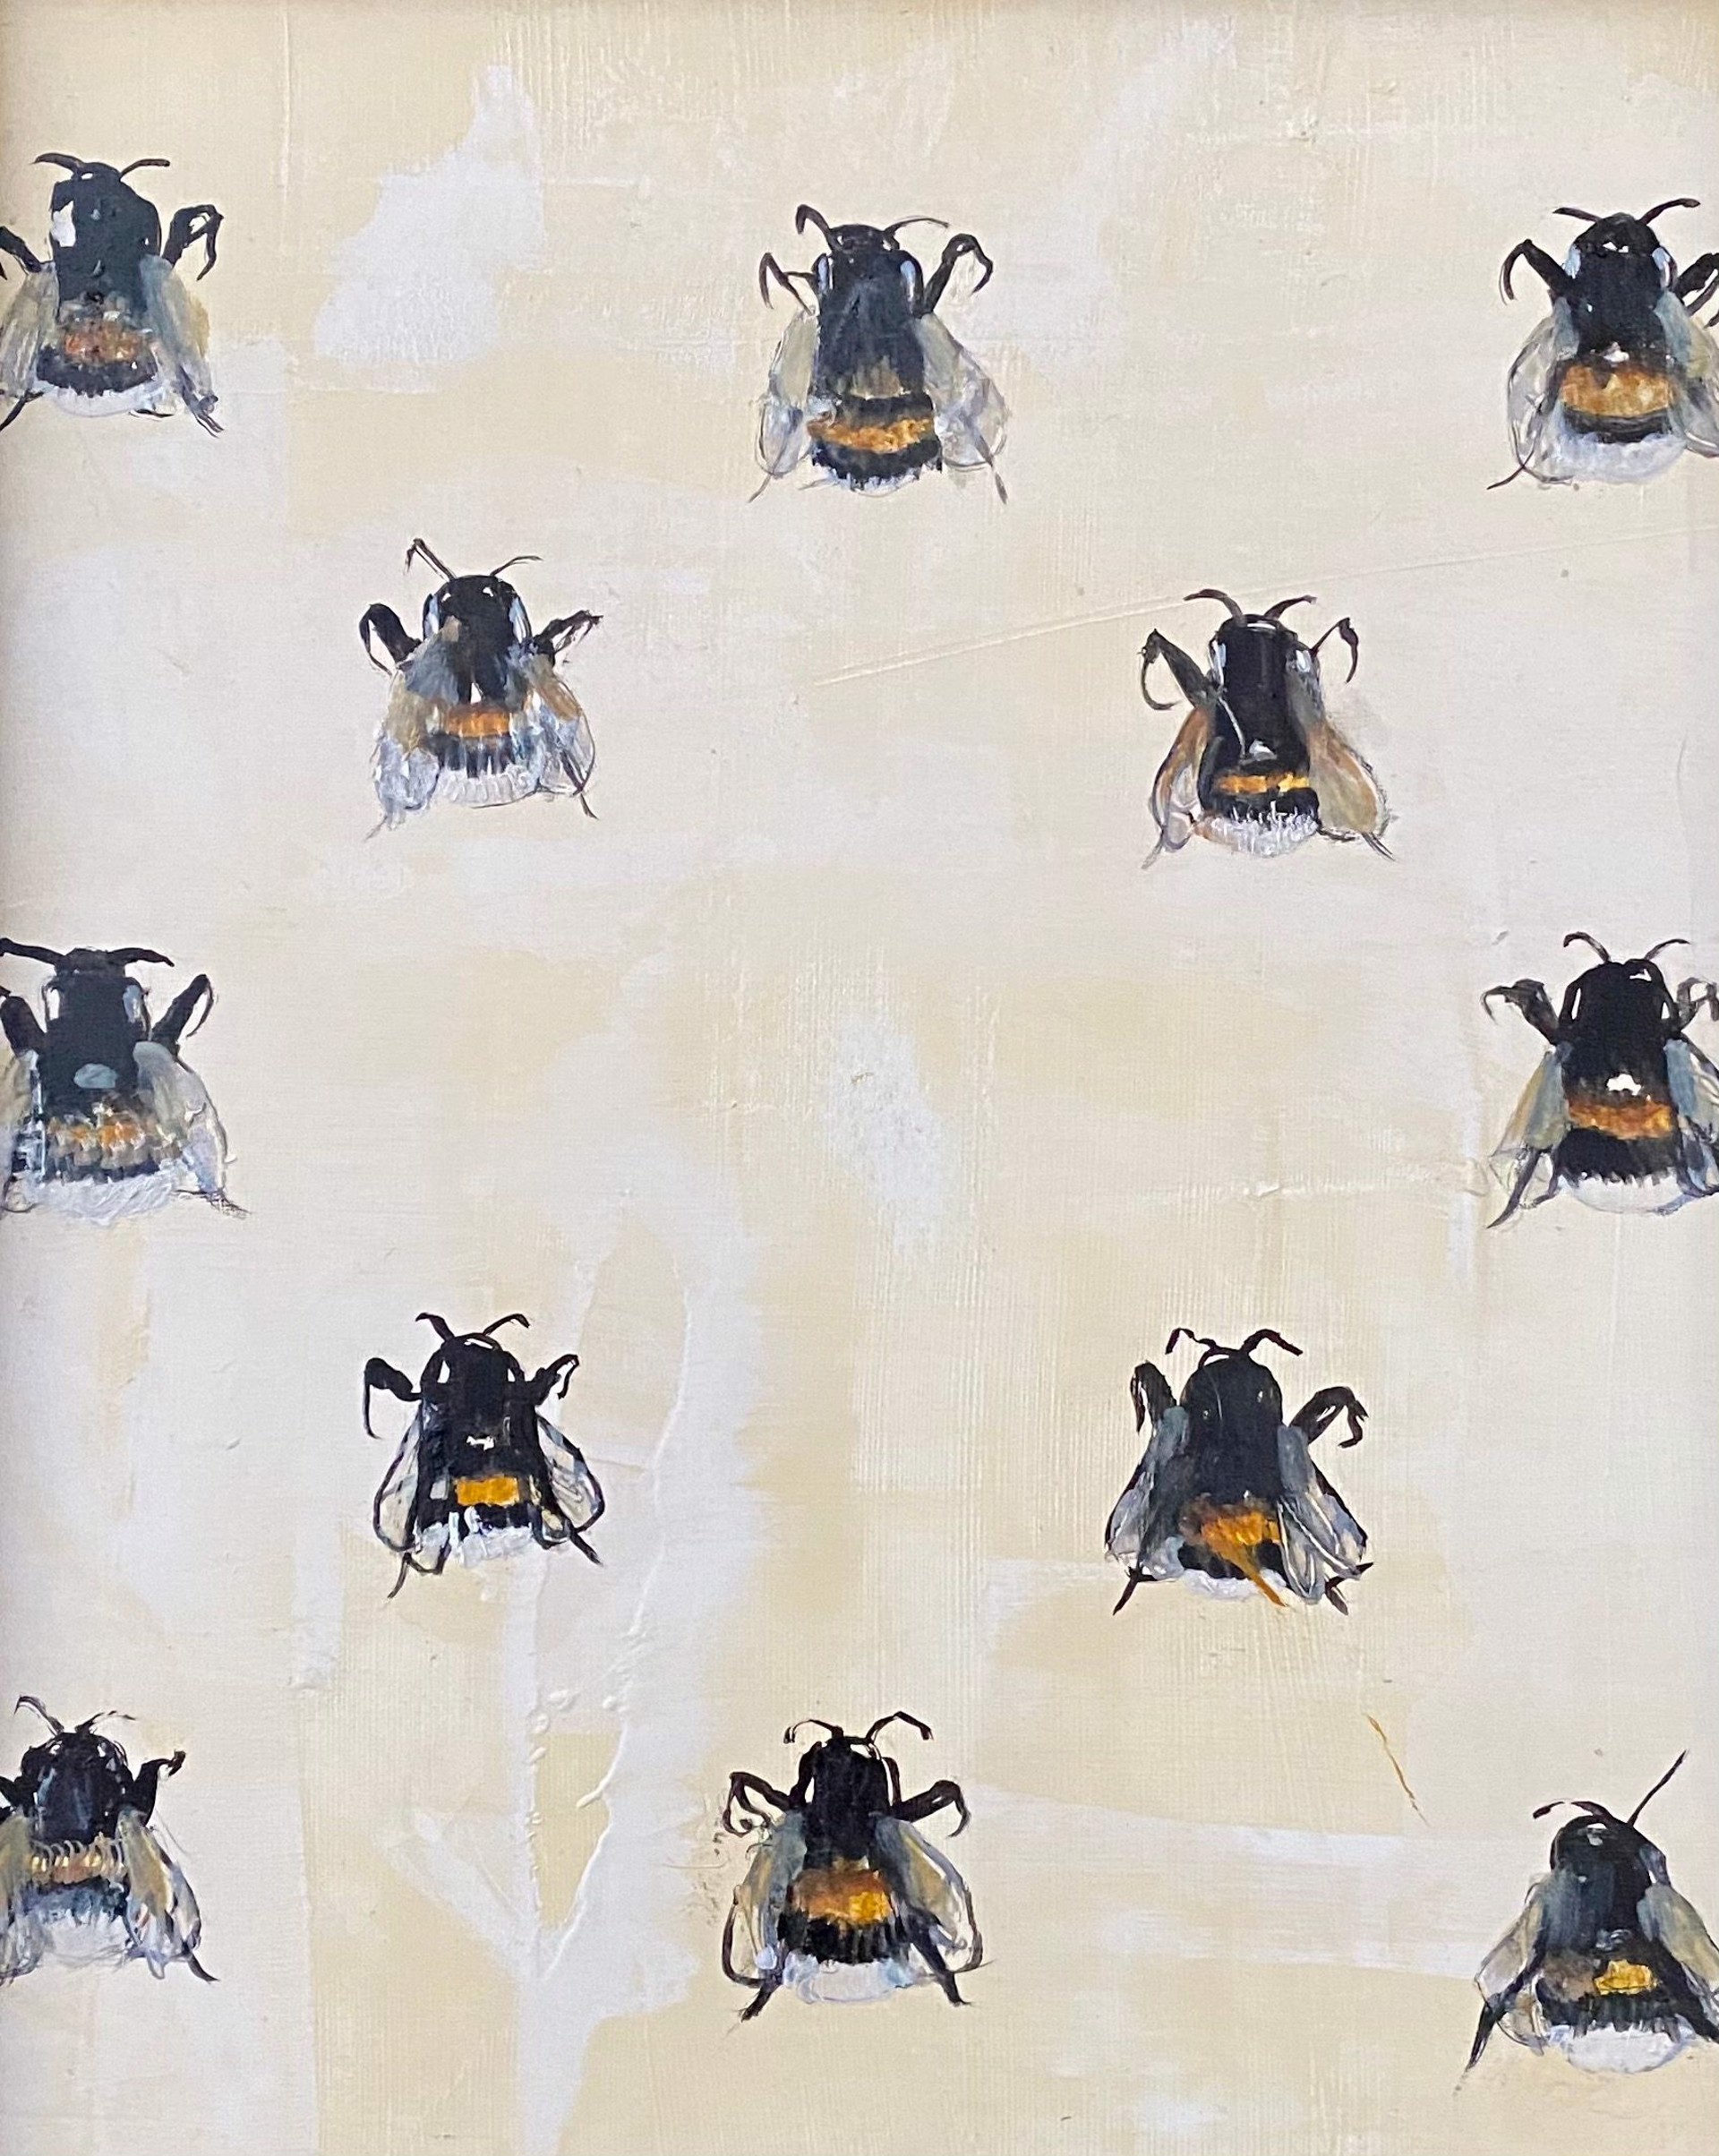 An Original Oil Painting Of Bees Arranged In A Pattern On A Warm Cream Contemporary Background, By Jenna Von Benedikt